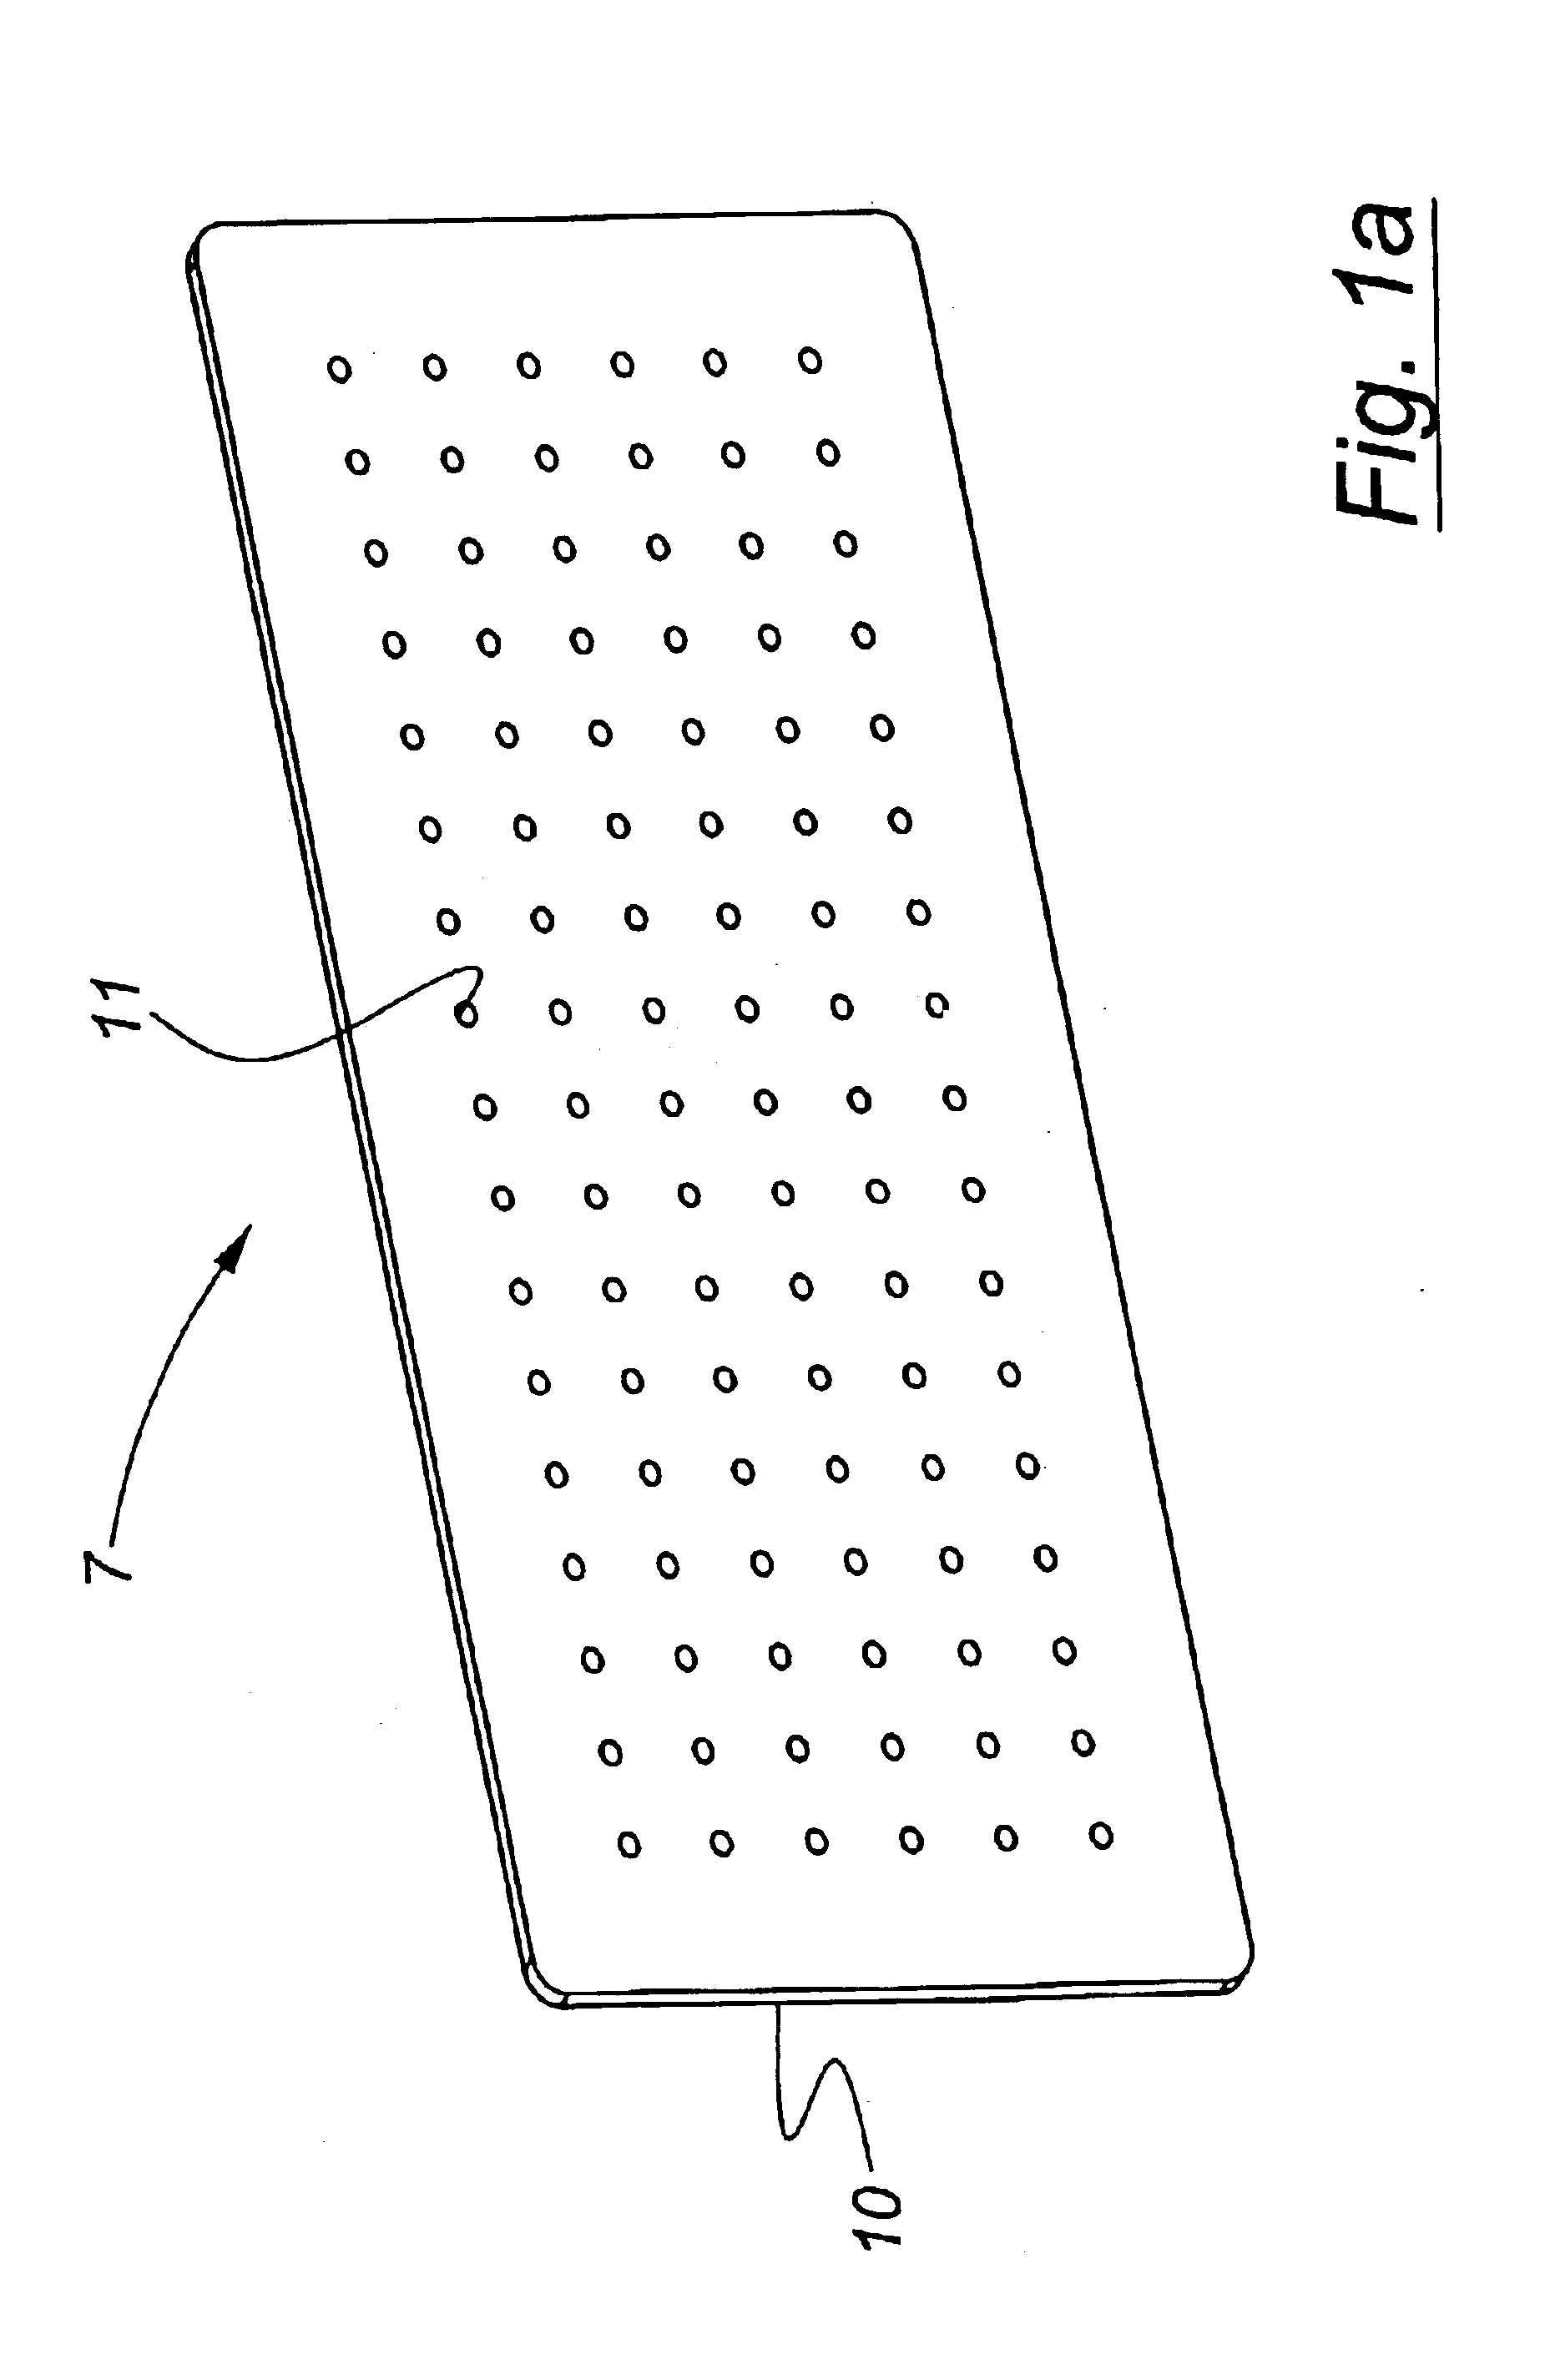 Tooling plate for a flexible manufacturing system